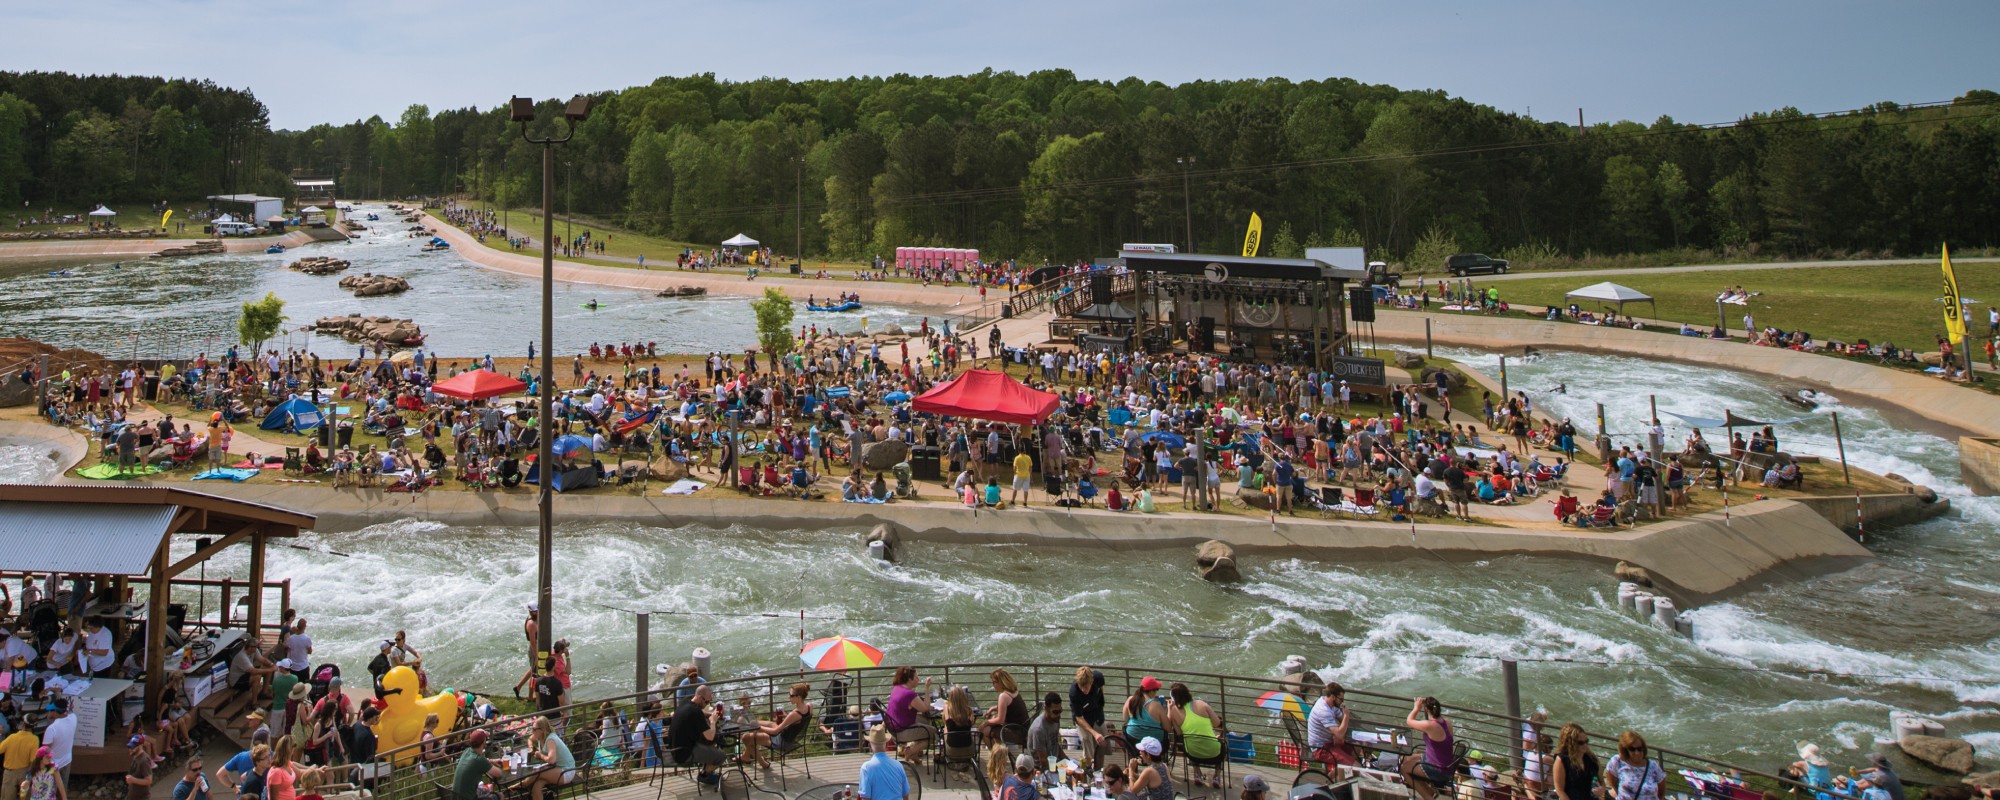 Tuck Fest The U.S. National Whitewater Center CLTure